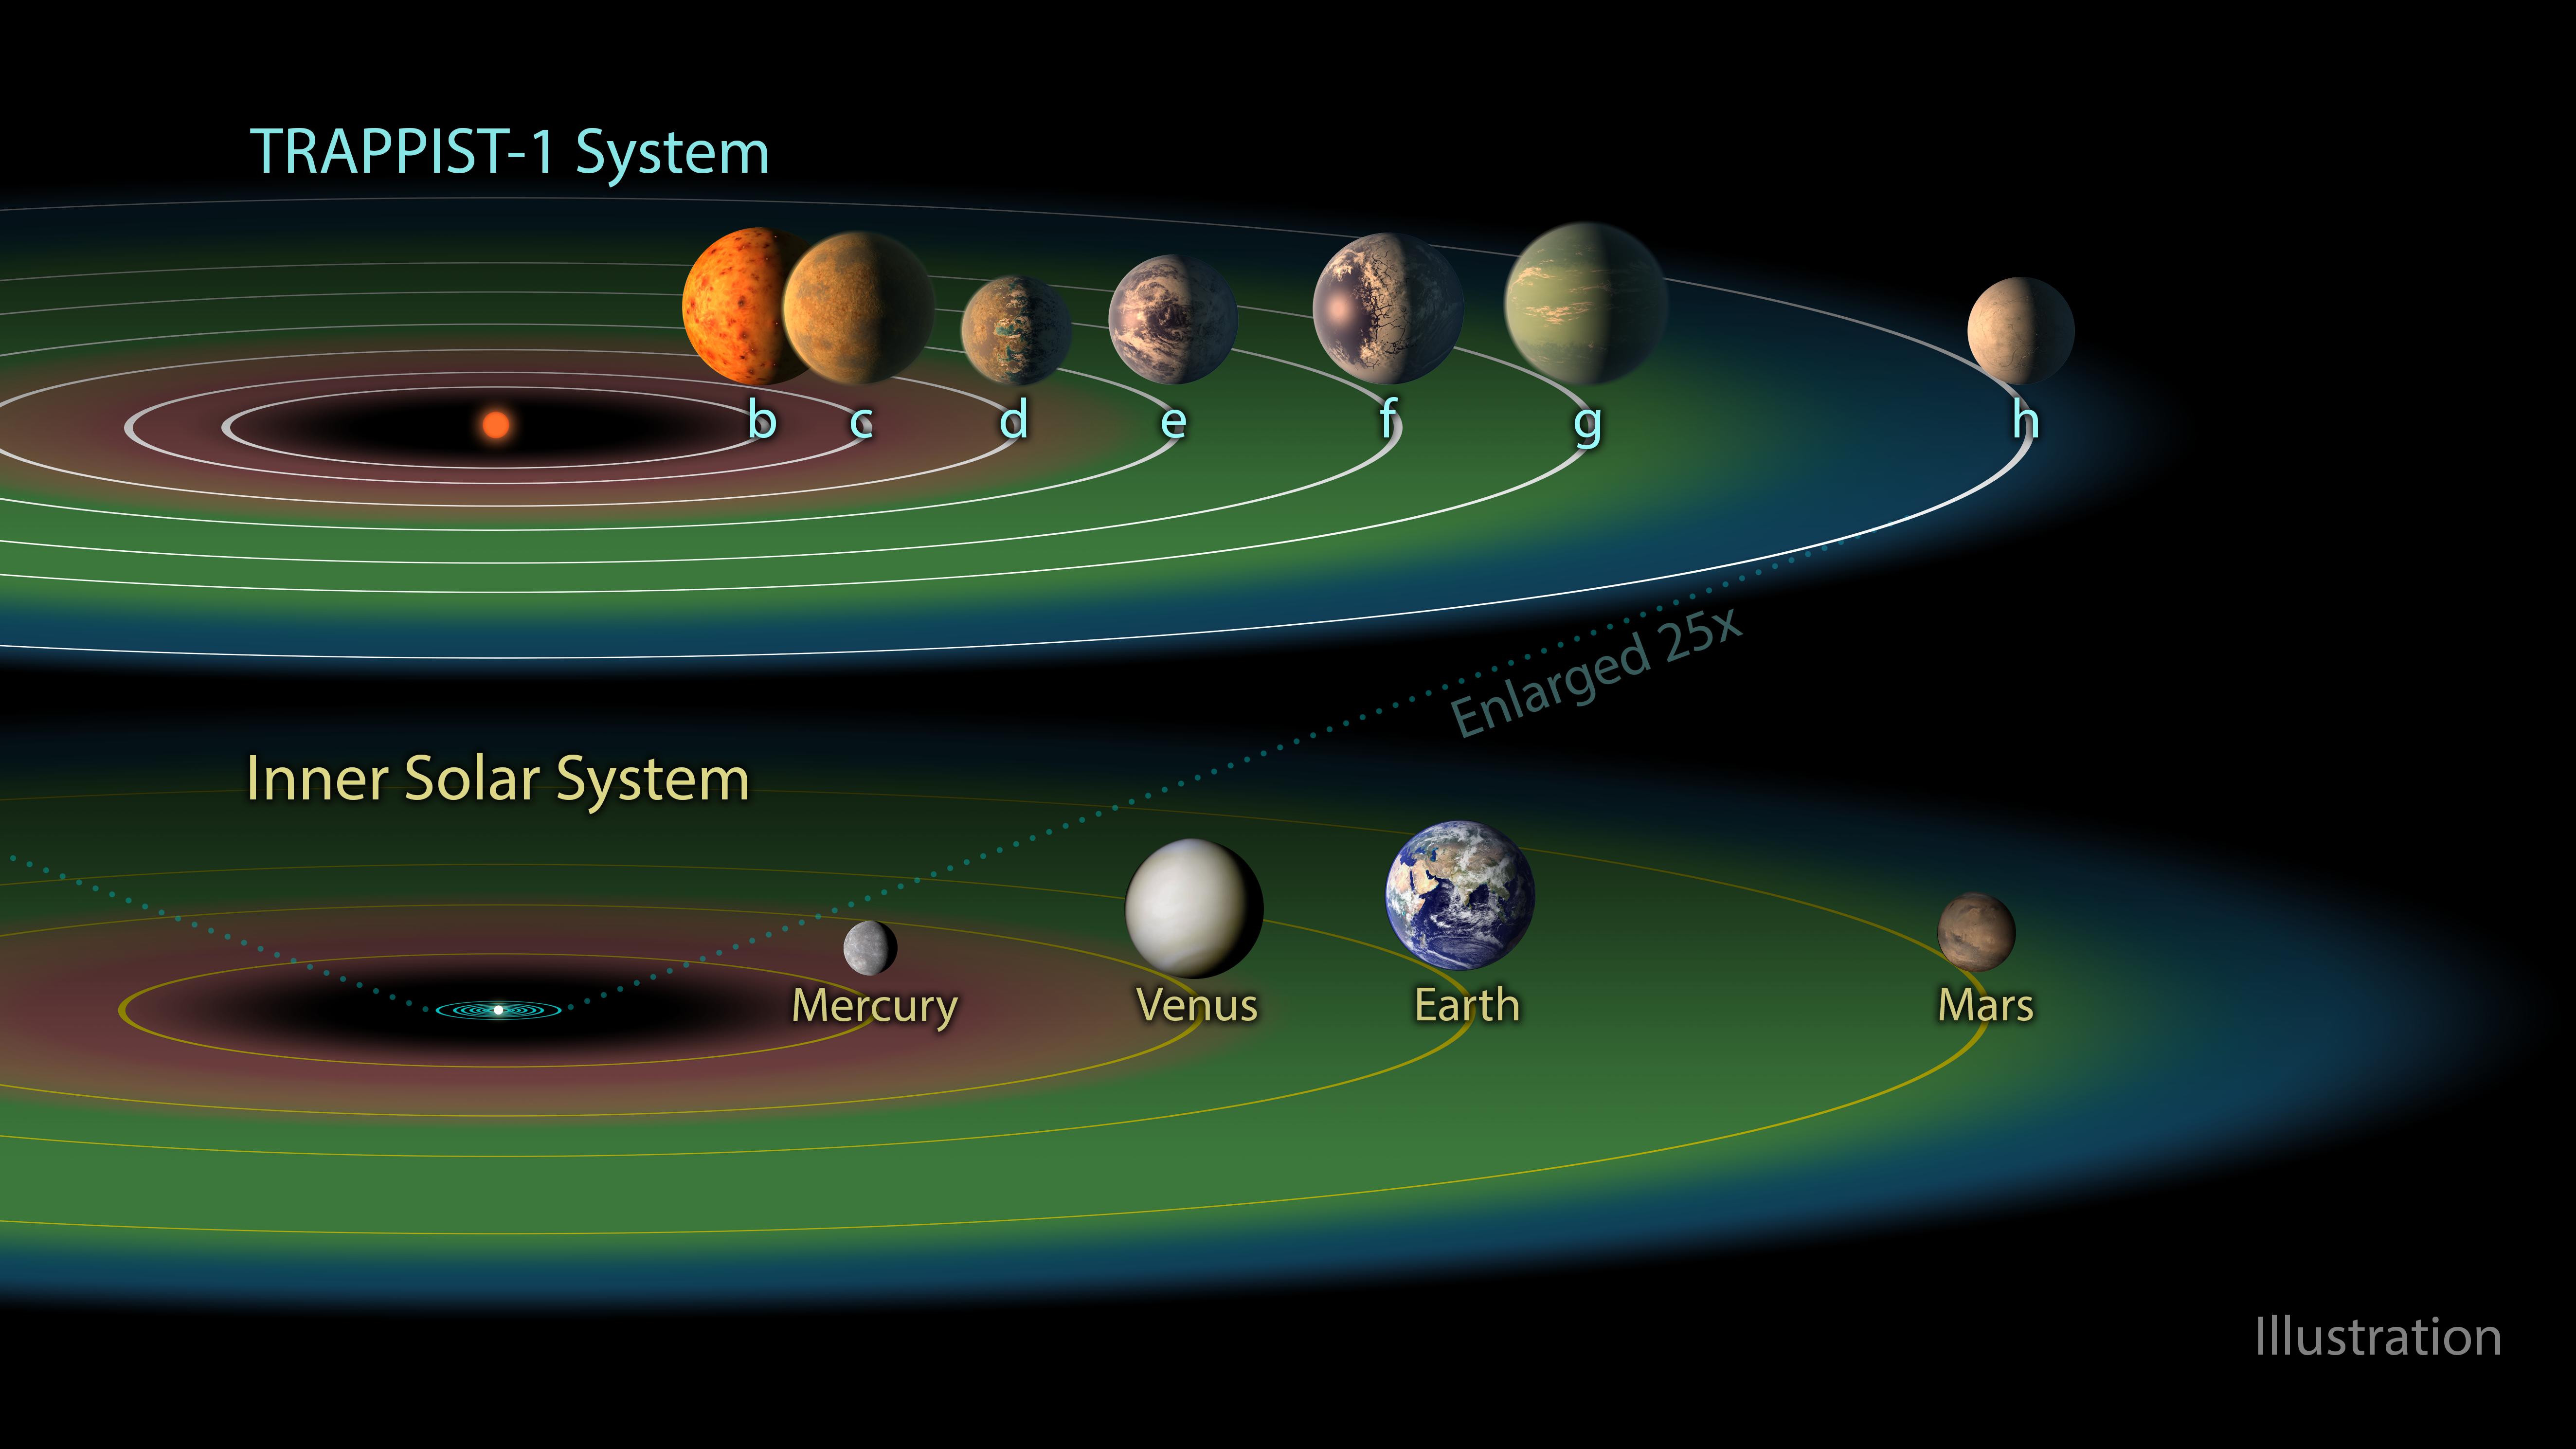 Comparison of TRAPPIST-1 System and Inner Solar System